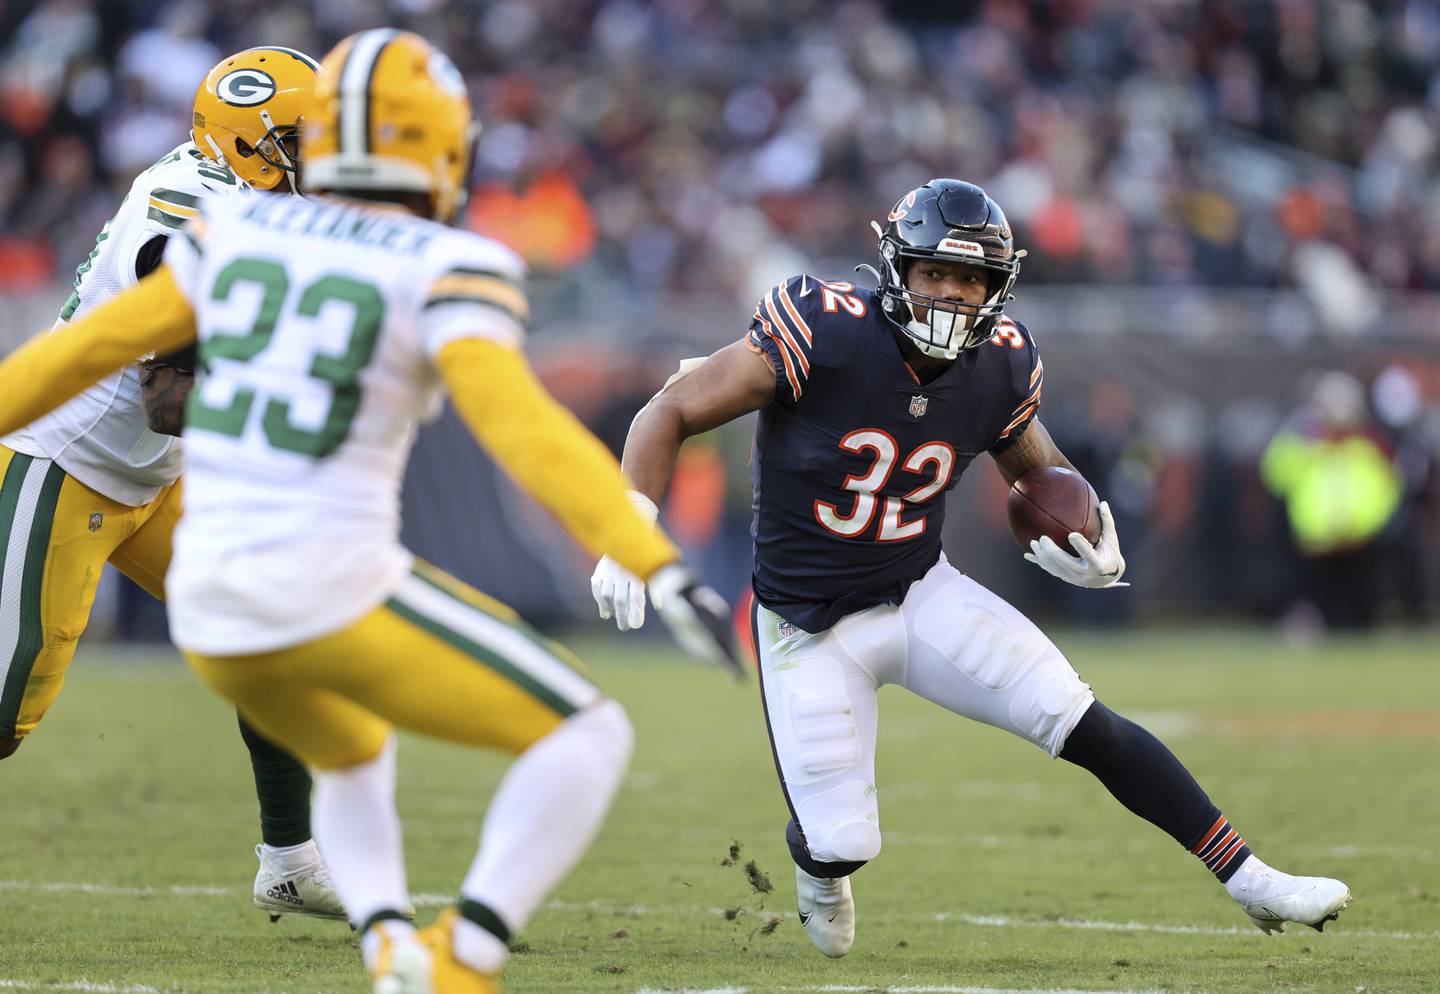 Bears running back David Montgomery makes a move in the third quarter against the Packers at Soldier Field on Dec. 4, 2022.